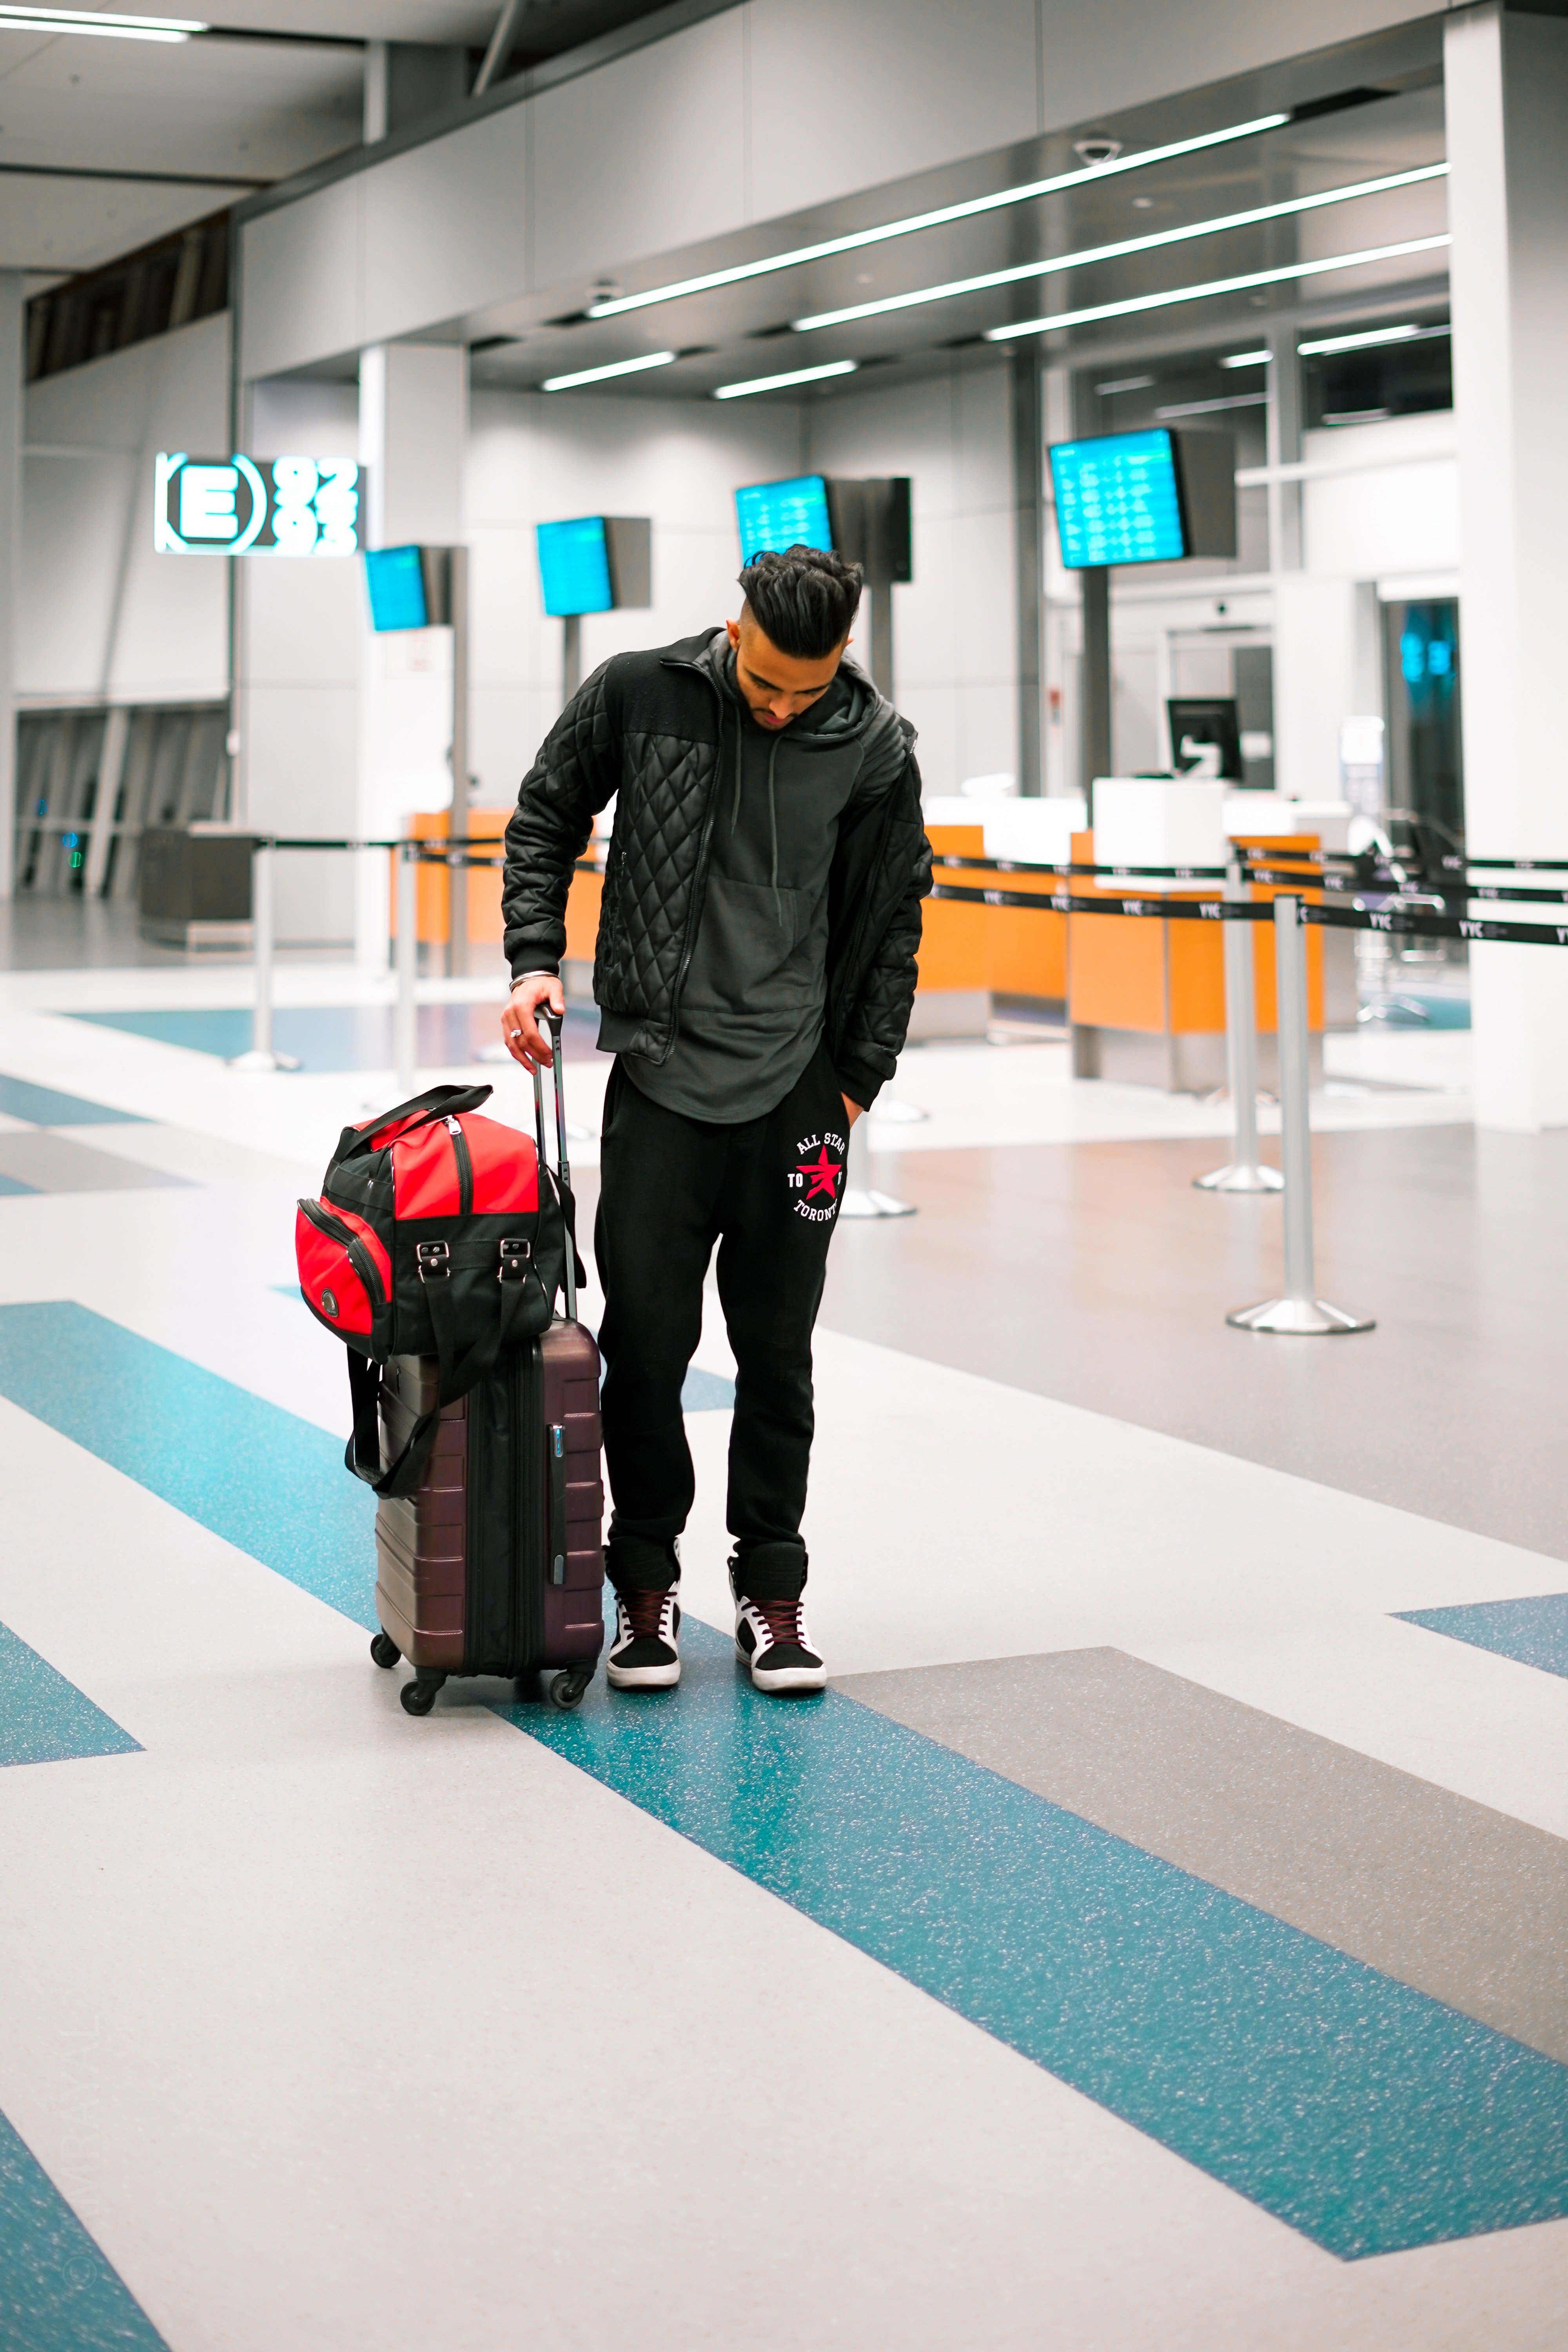 Pictured - A man at the airport carrying his luggage while looking down. | Source: Pexels 